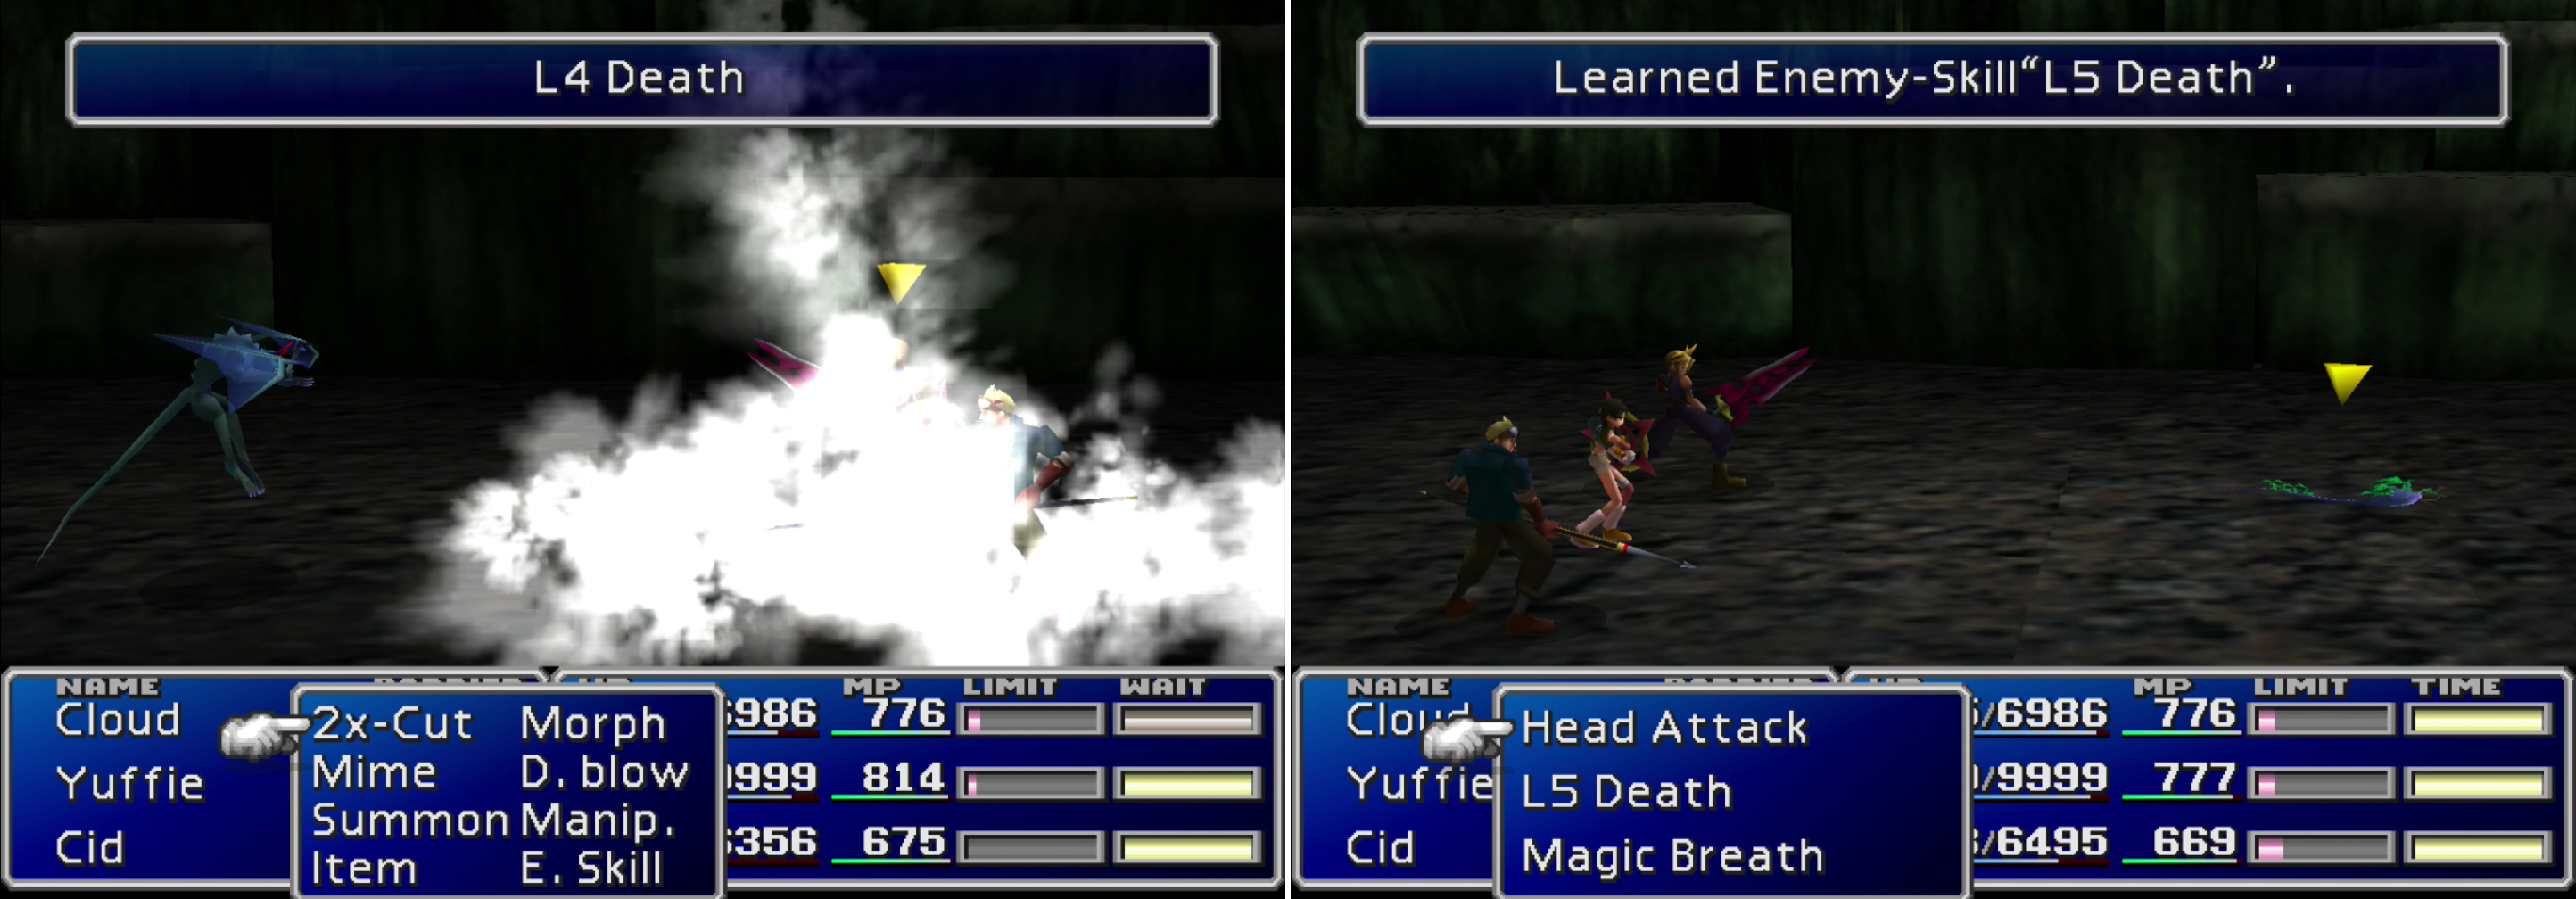 Gargoyles will cast “L4 Death” as a final attack before they die (left), be sure to protect yourself with “Death Force”. You can learn the “L5 Death” and “Magic Breath” Enemy Skills from Parasites (right).